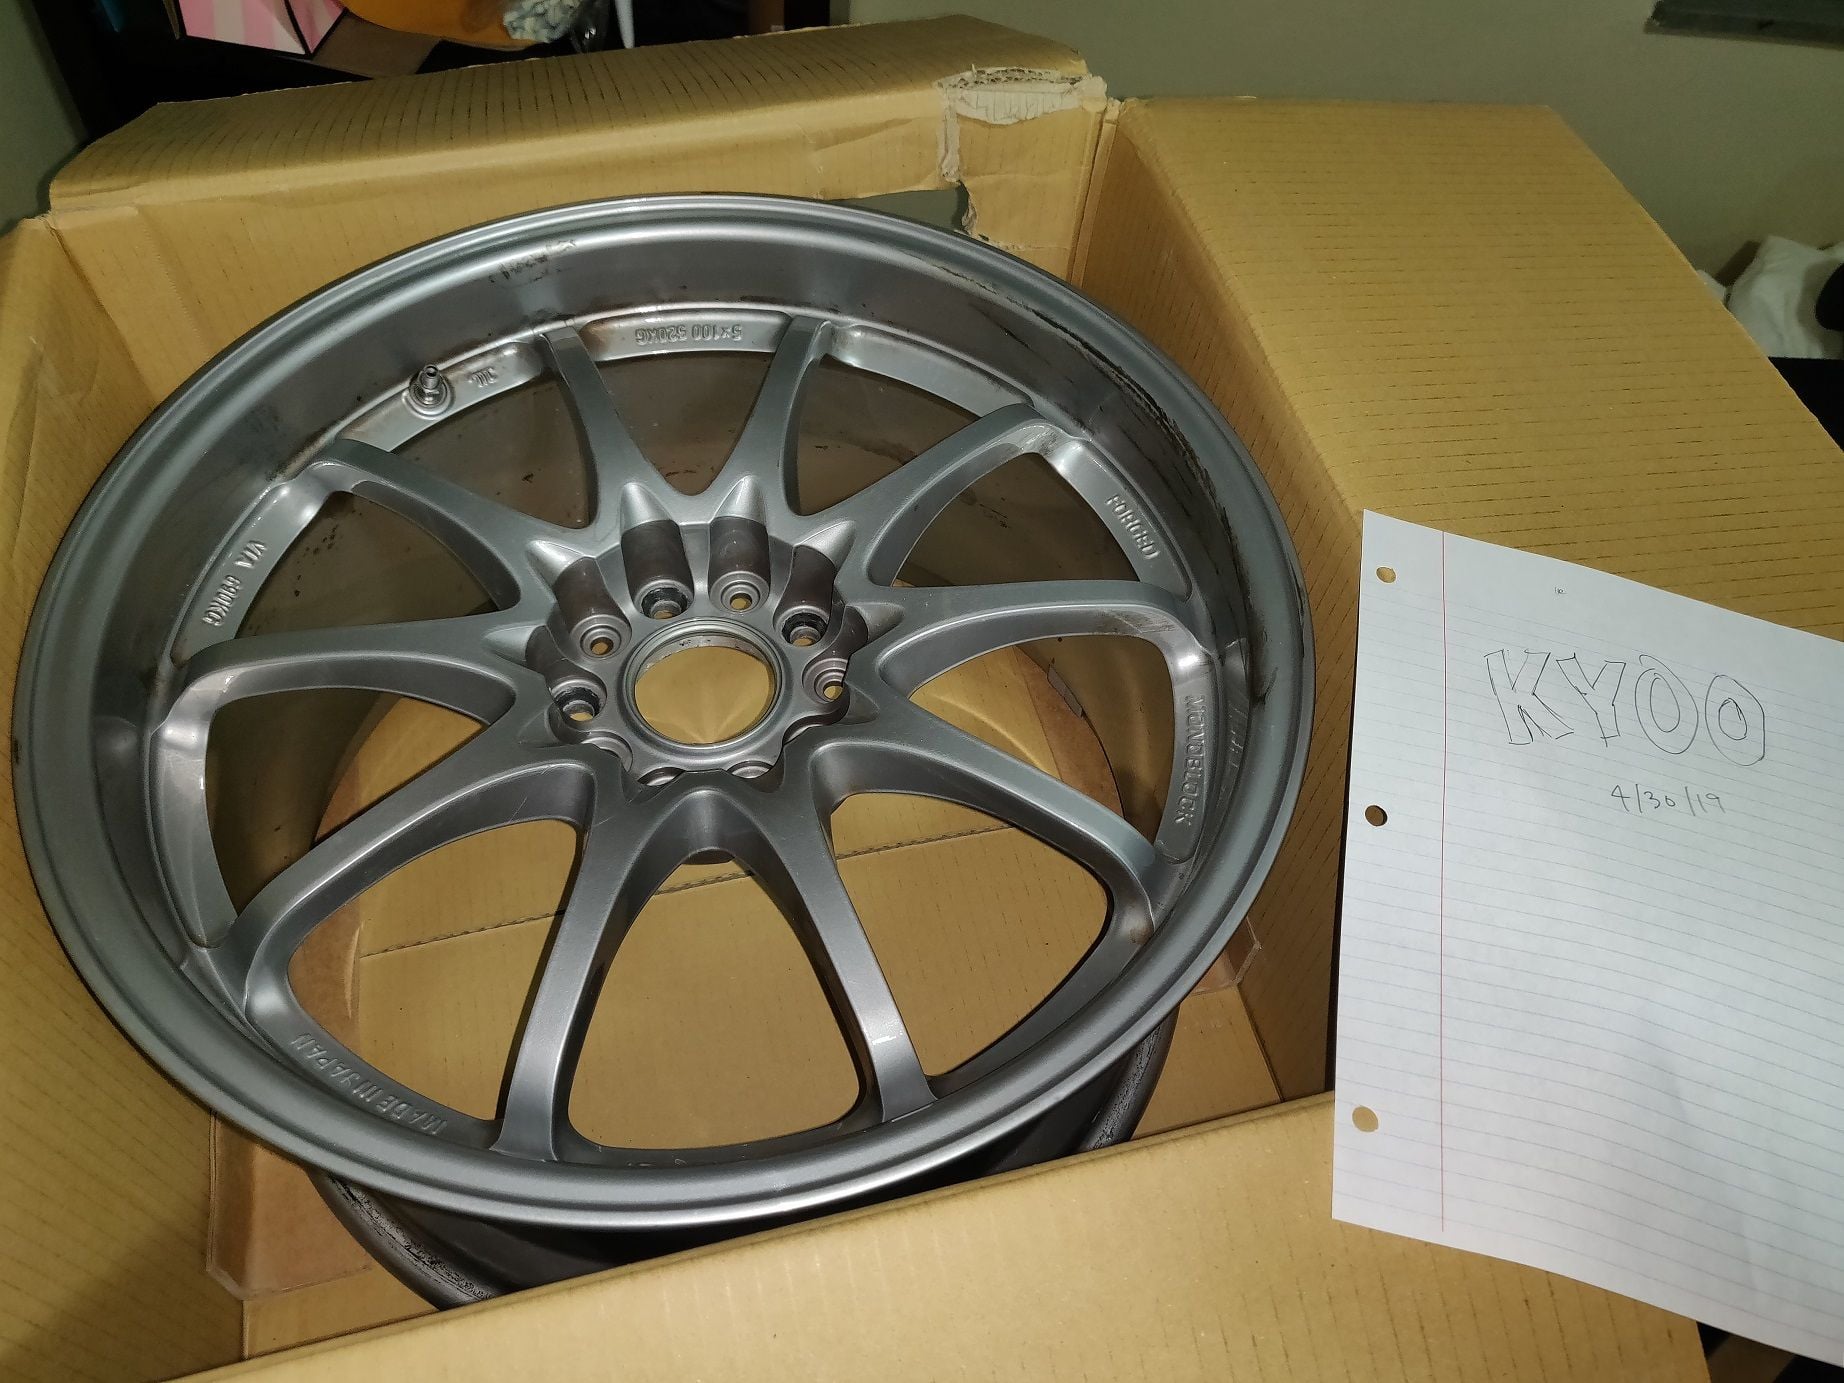 Wheels and Tires/Axles - Volk CE28N 18x9.5 +34 (Discontinued) - Used - 2003 to 2015 Mitsubishi Lancer Evolution - Saint Louis, MO 63105, United States